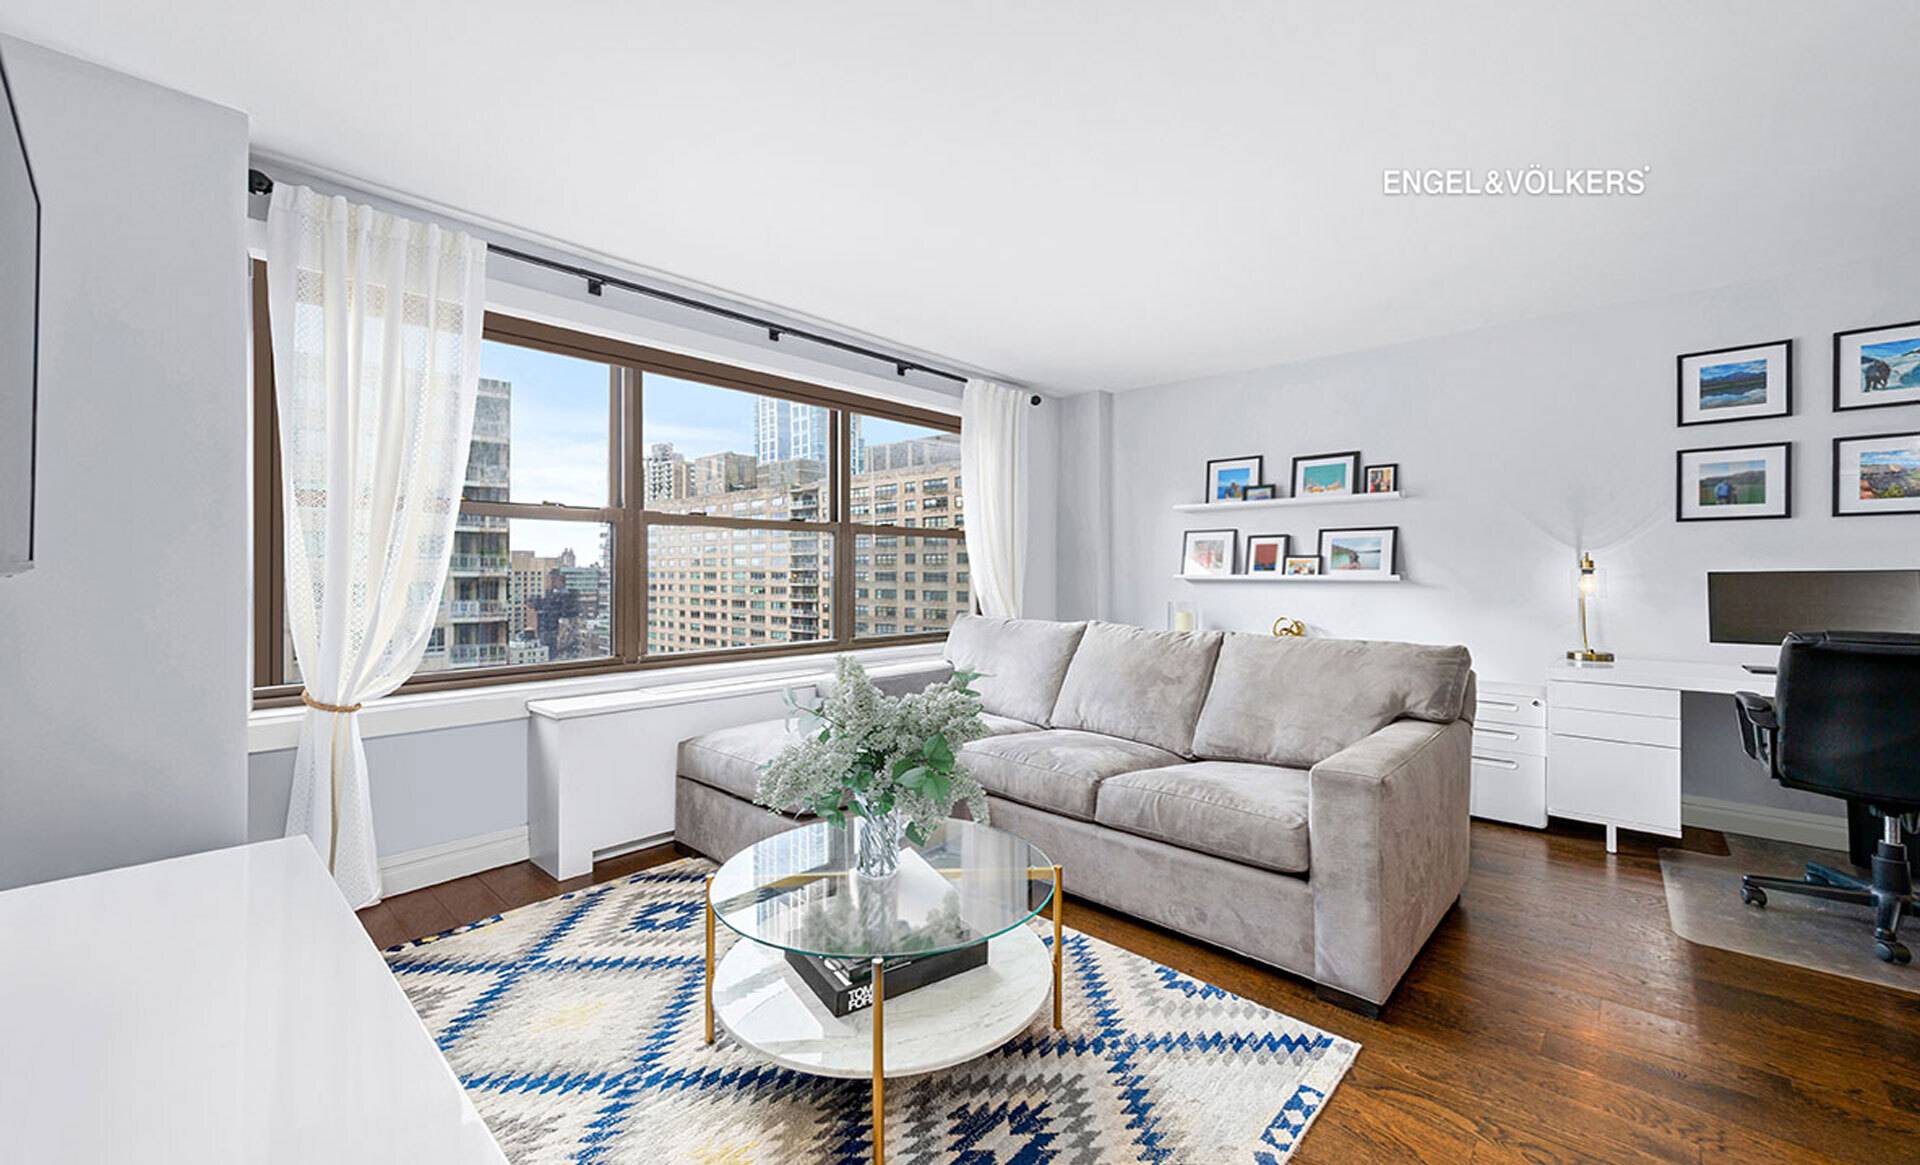 Perched on the 27th floor, this one bedroom gem radiates with sophistication.